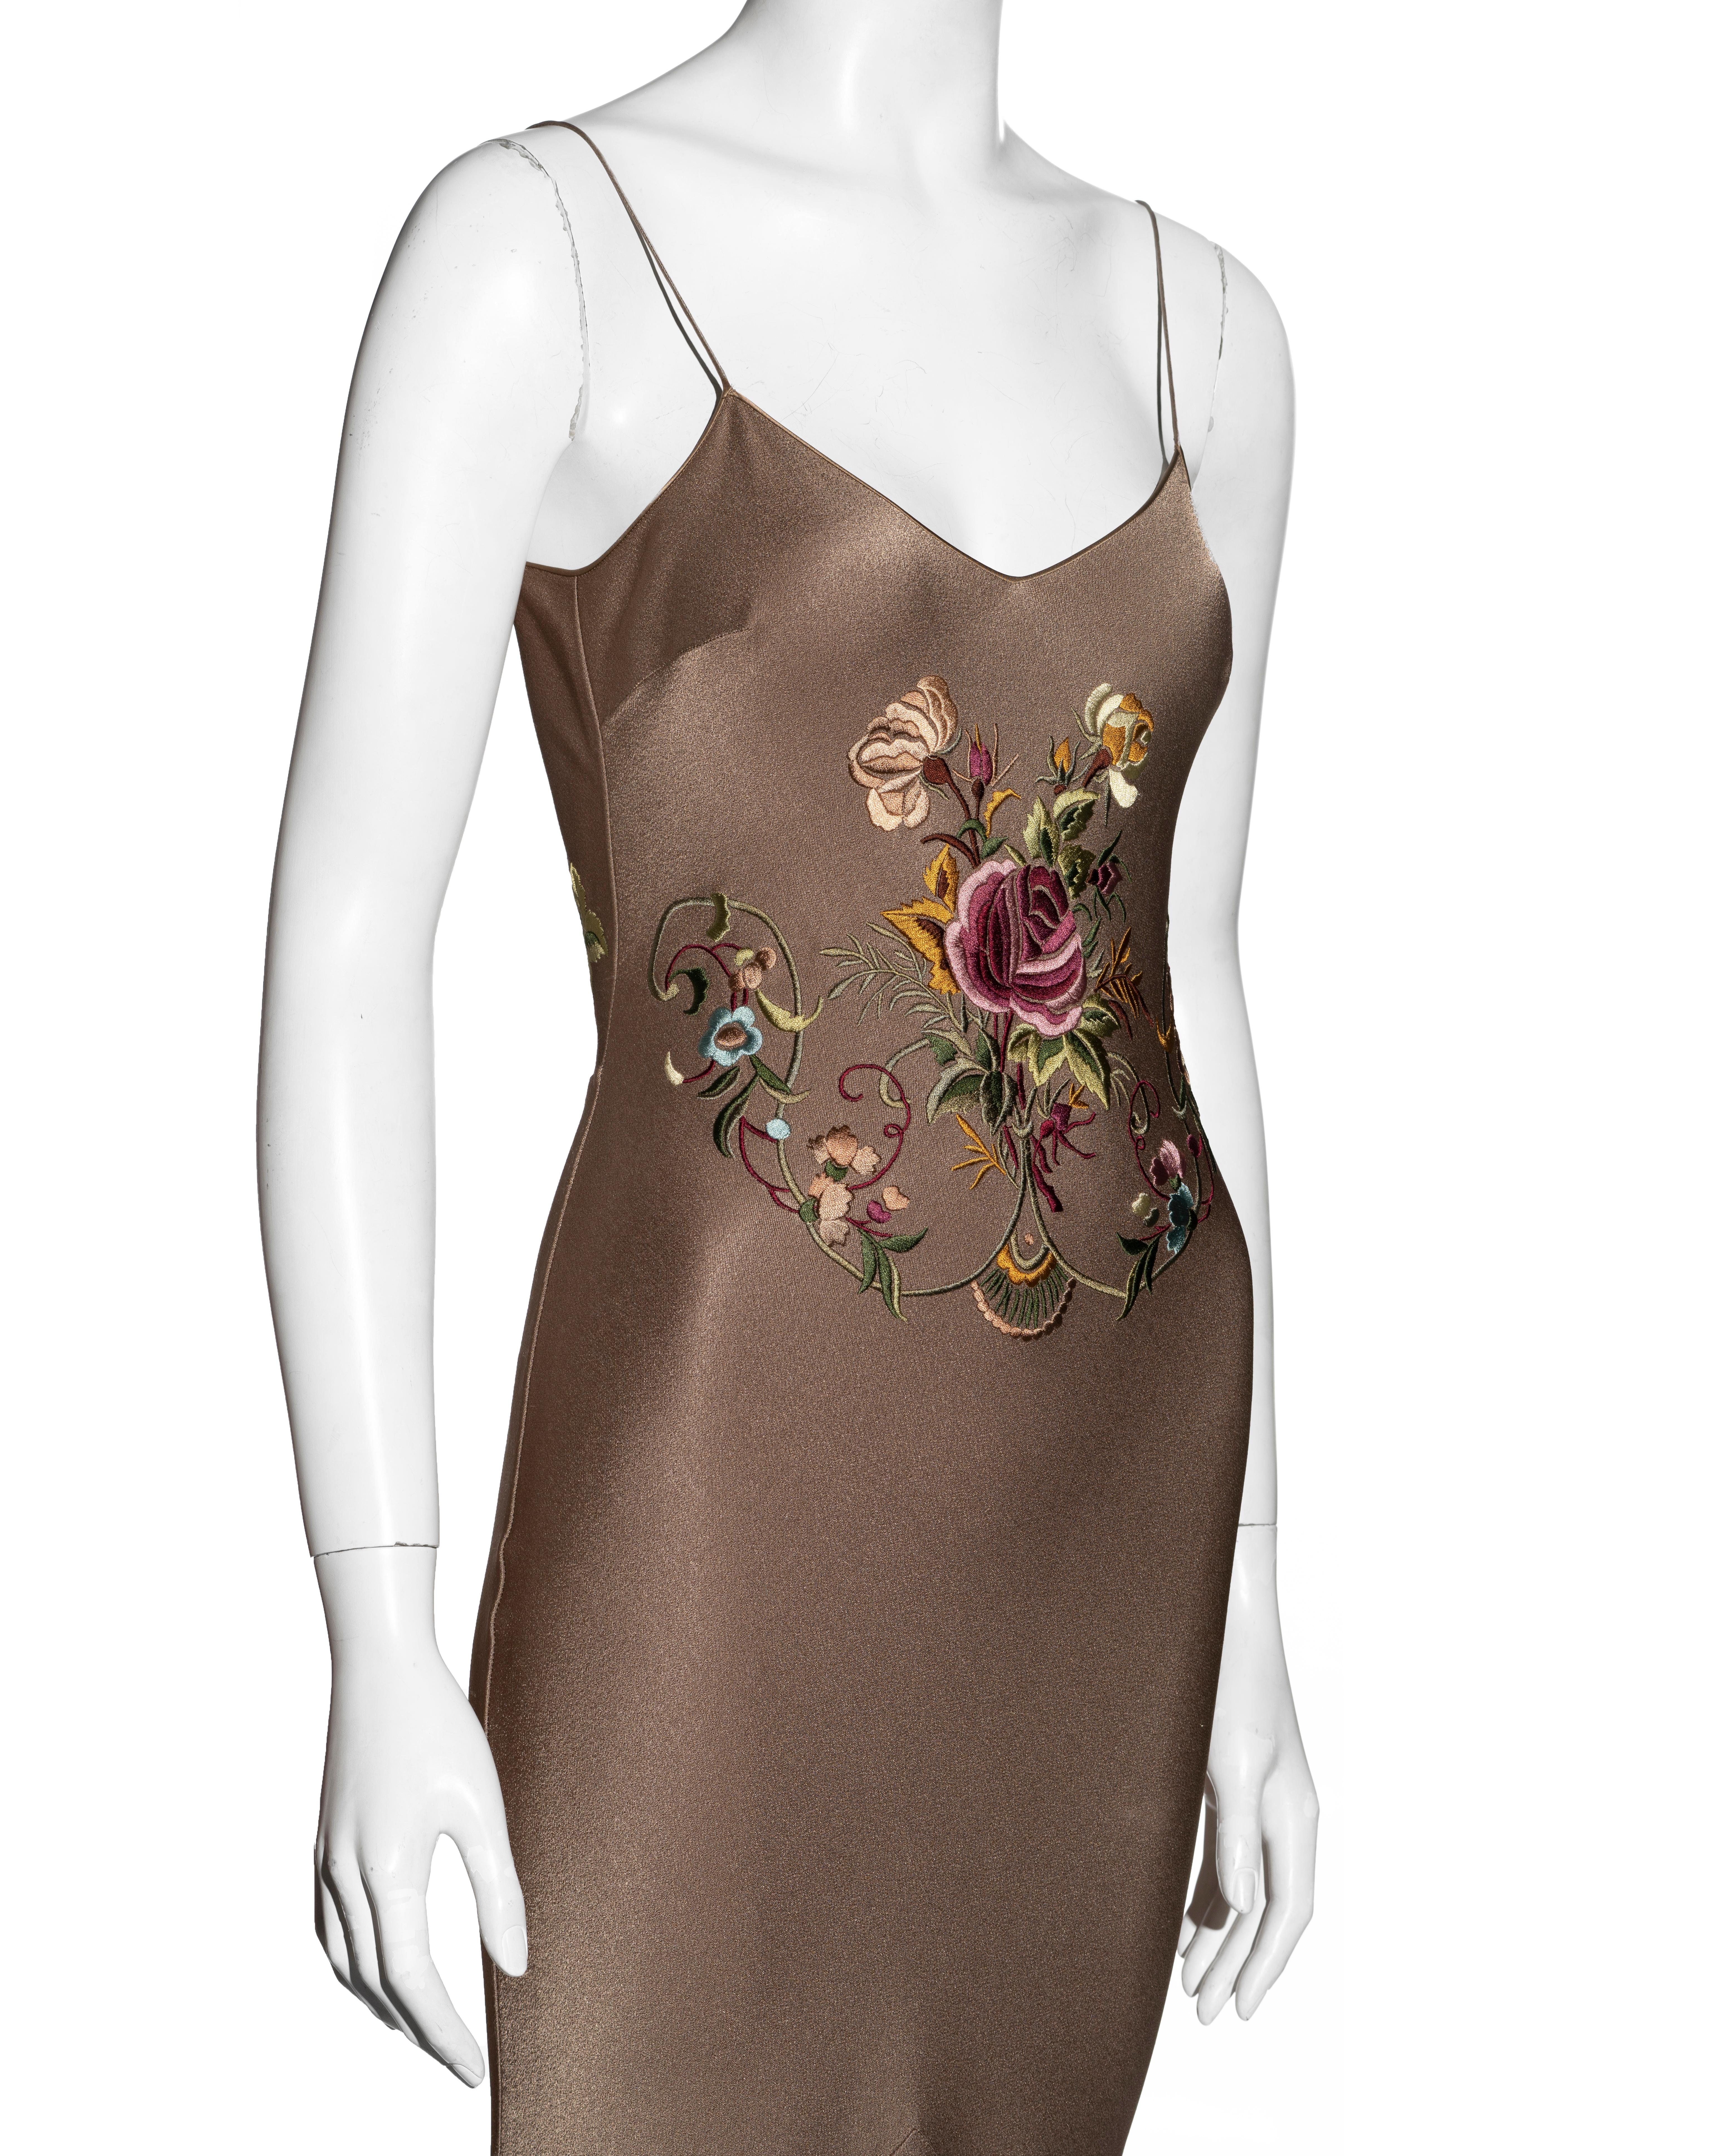 Brown John Galliano taupe satin crepe evening dress with floral embroidery, ss 2003 For Sale